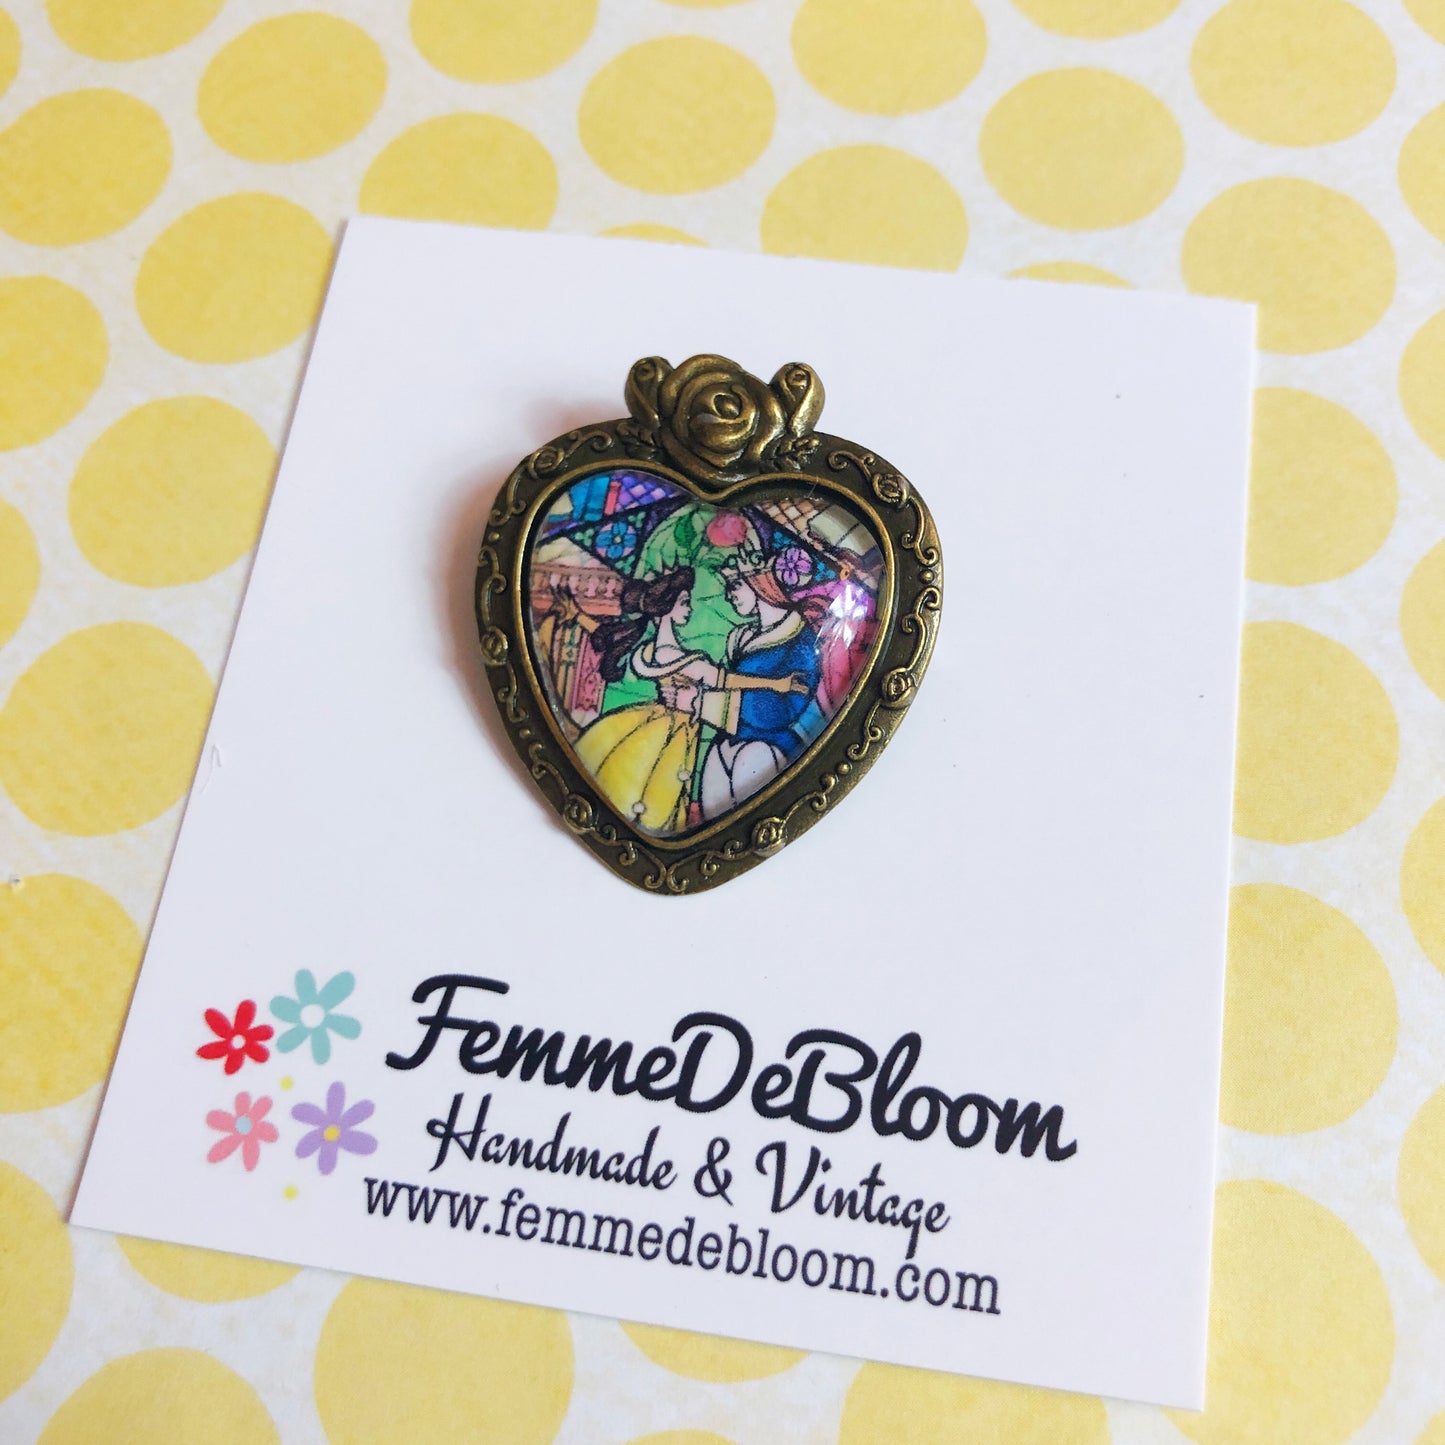 Belle & Prince Heart Stained Glass Brooch